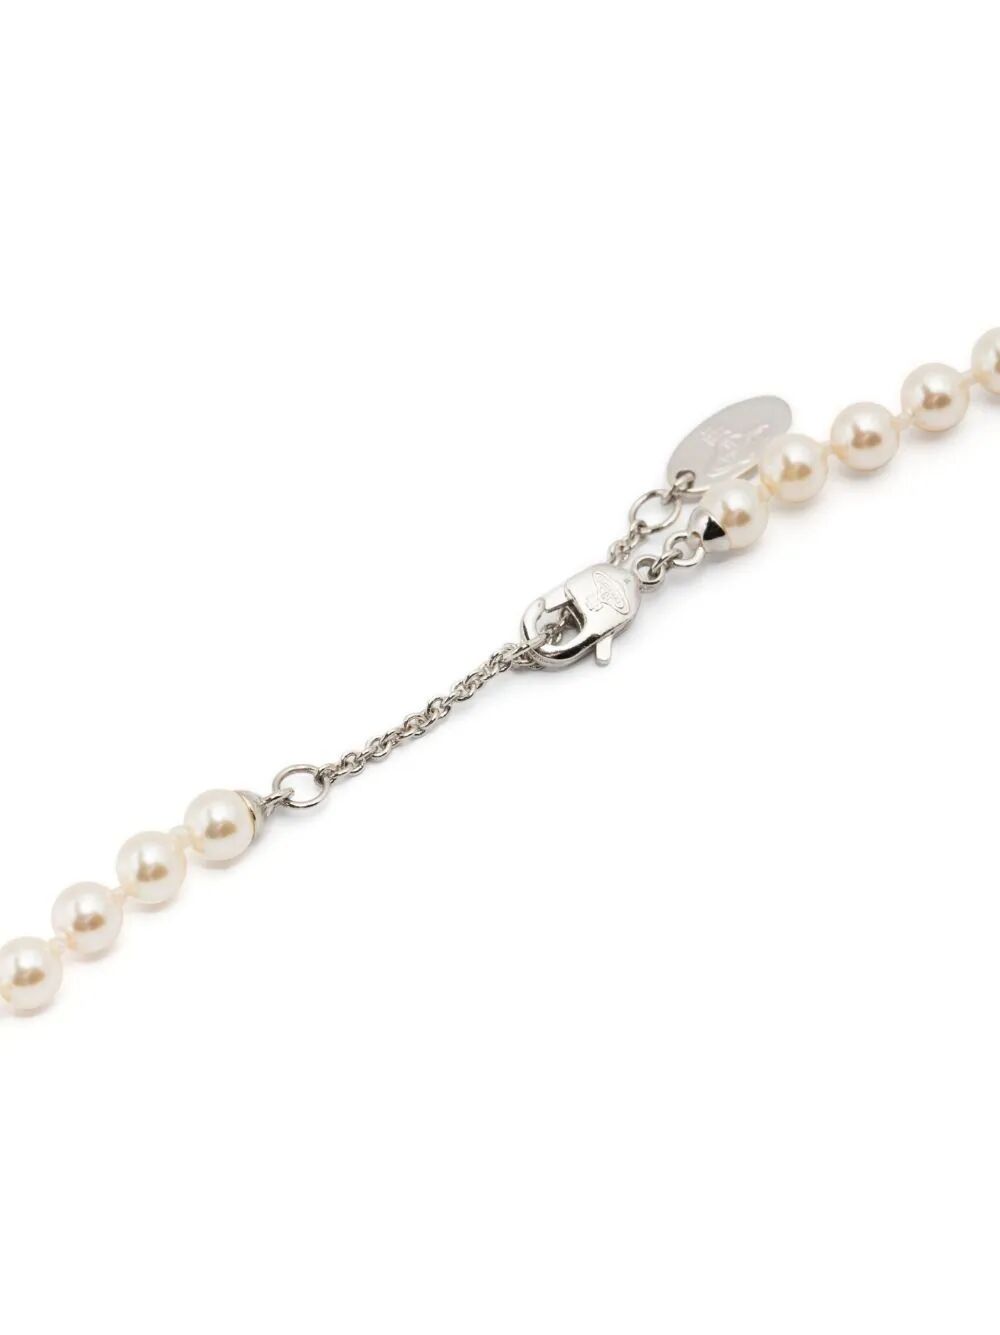 Olympia Pearl Necklace